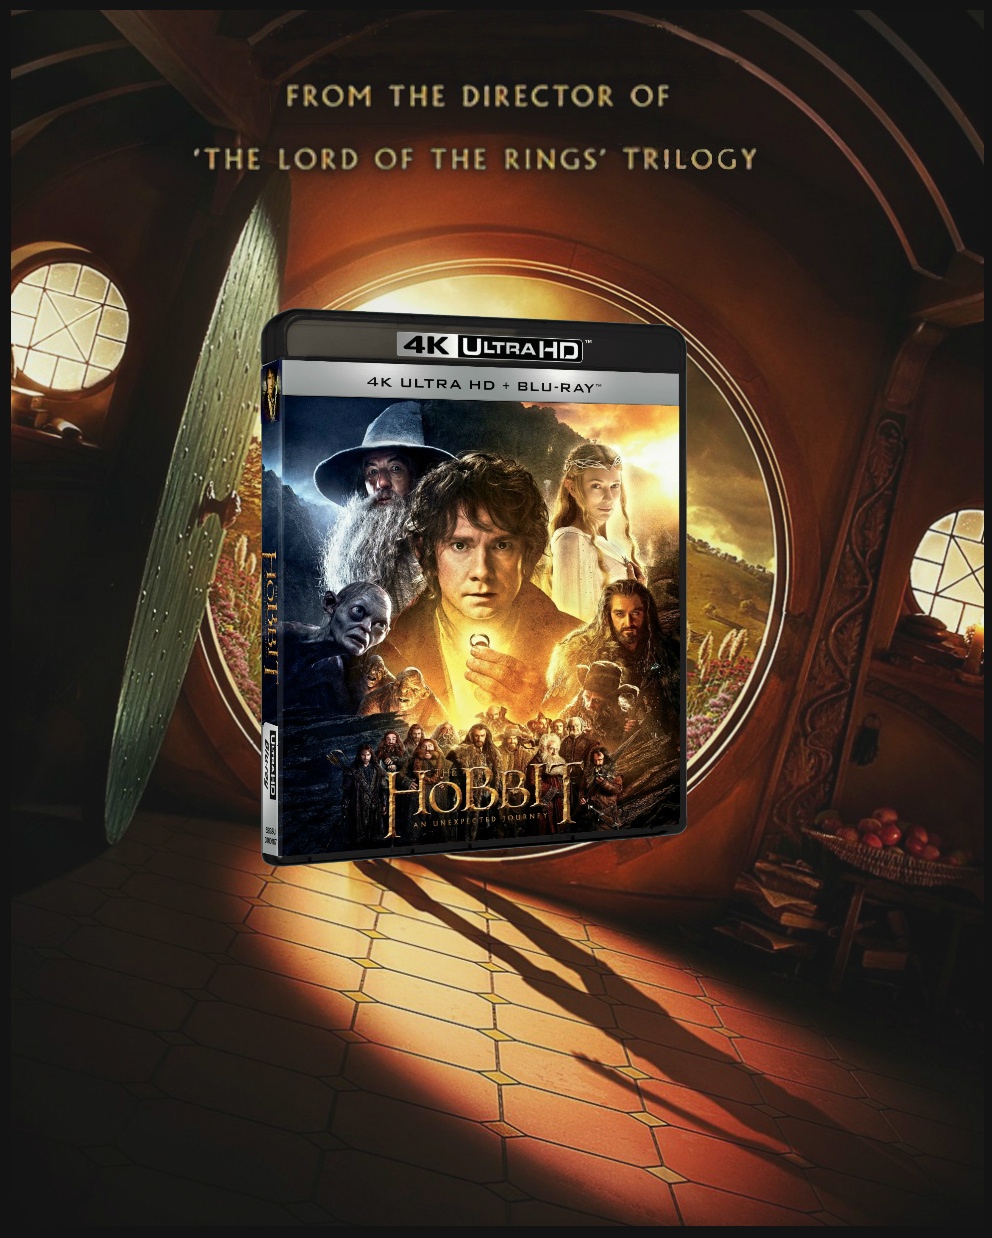 download the new version The Hobbit: An Unexpected Journey